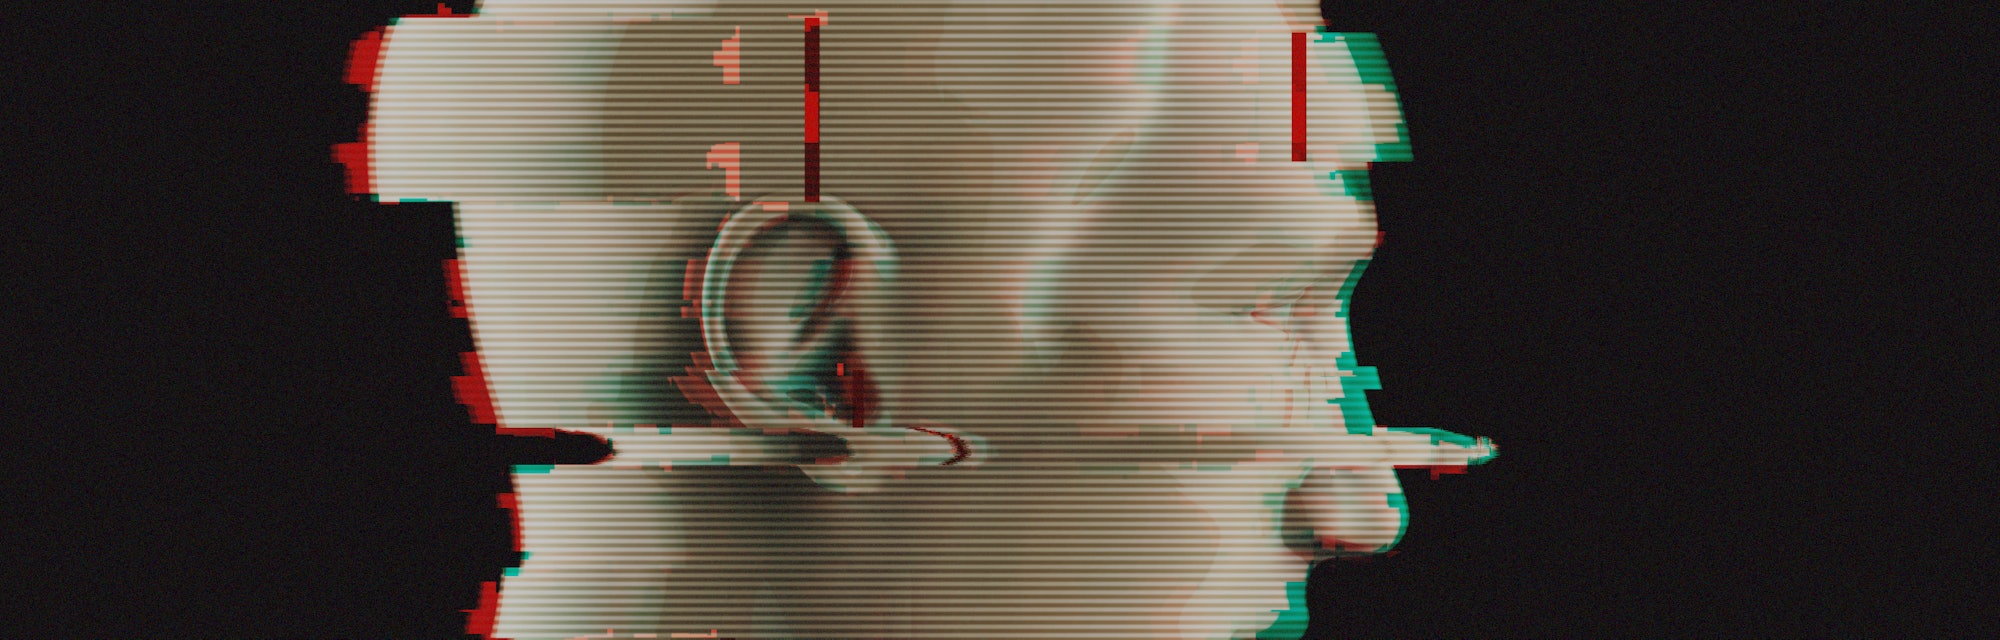 3d portrait of a man with glitch effect. Isolated on dark background